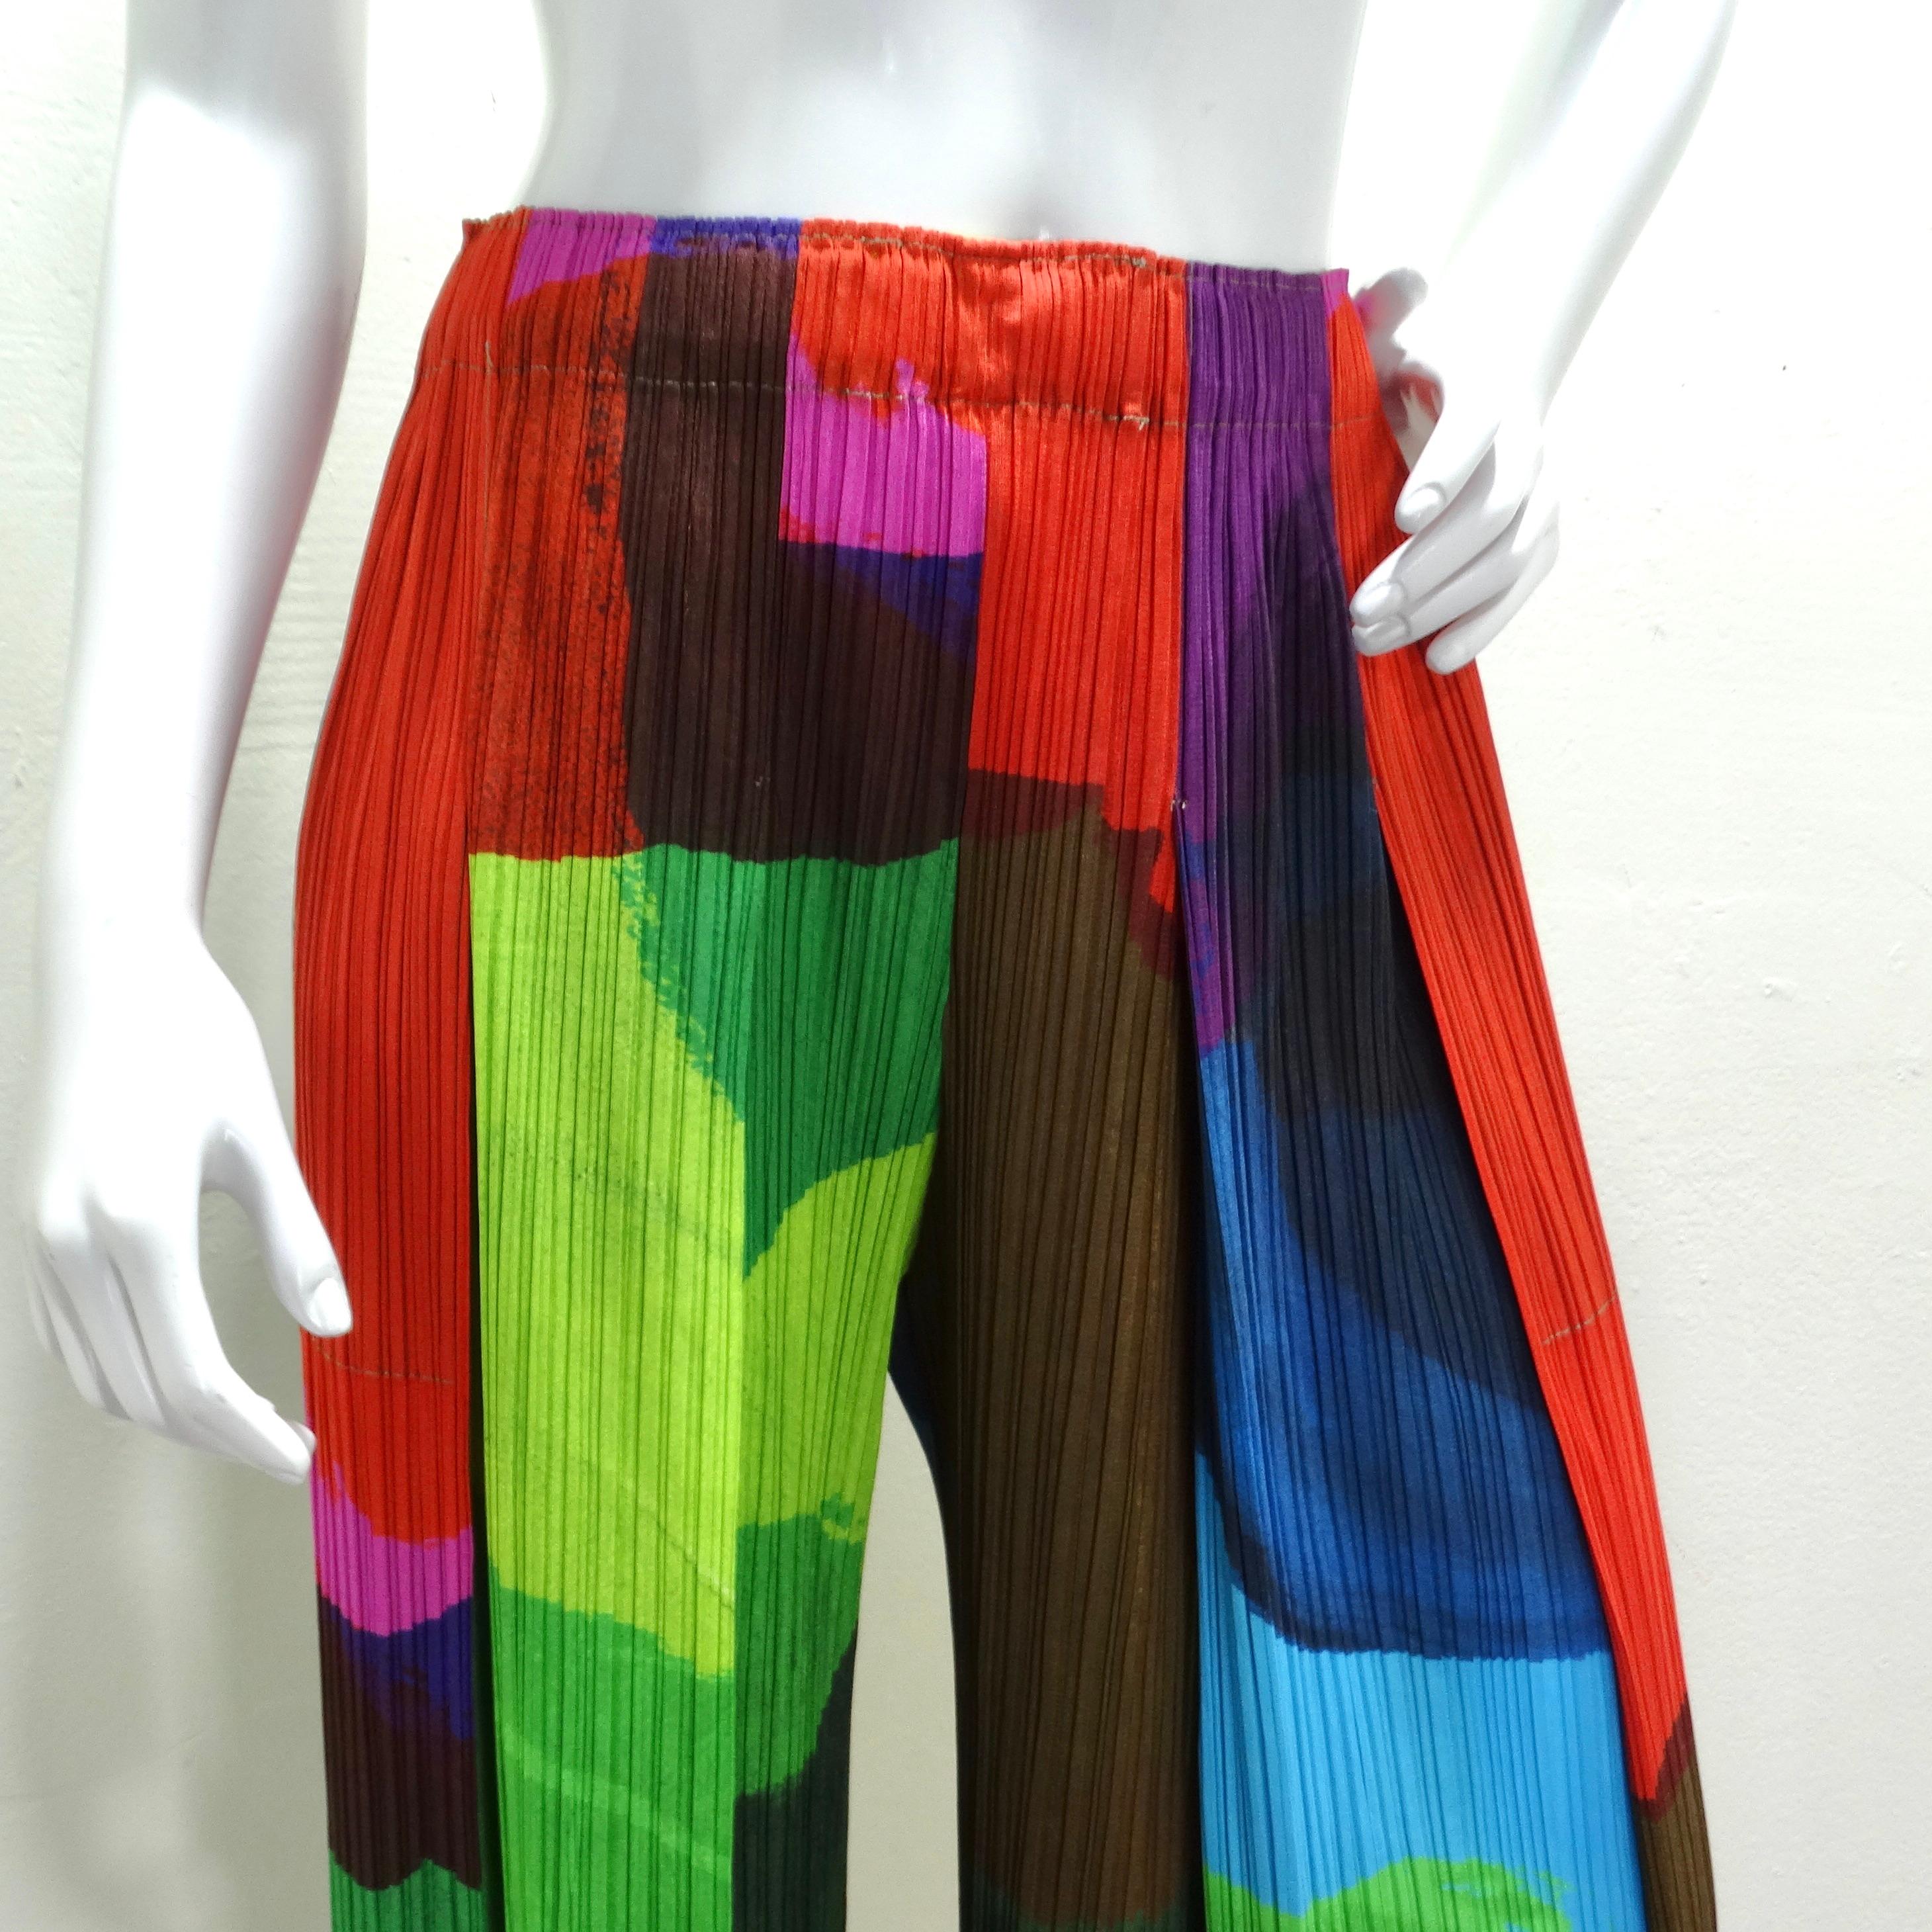 The Issey Miyake 1990s Pleats Please Multicolor Pants are a vibrant and iconic representation of the Pleats Please line, showcasing the designer's innovative pleating technique and creative use of color. These flared pants feature a stunning